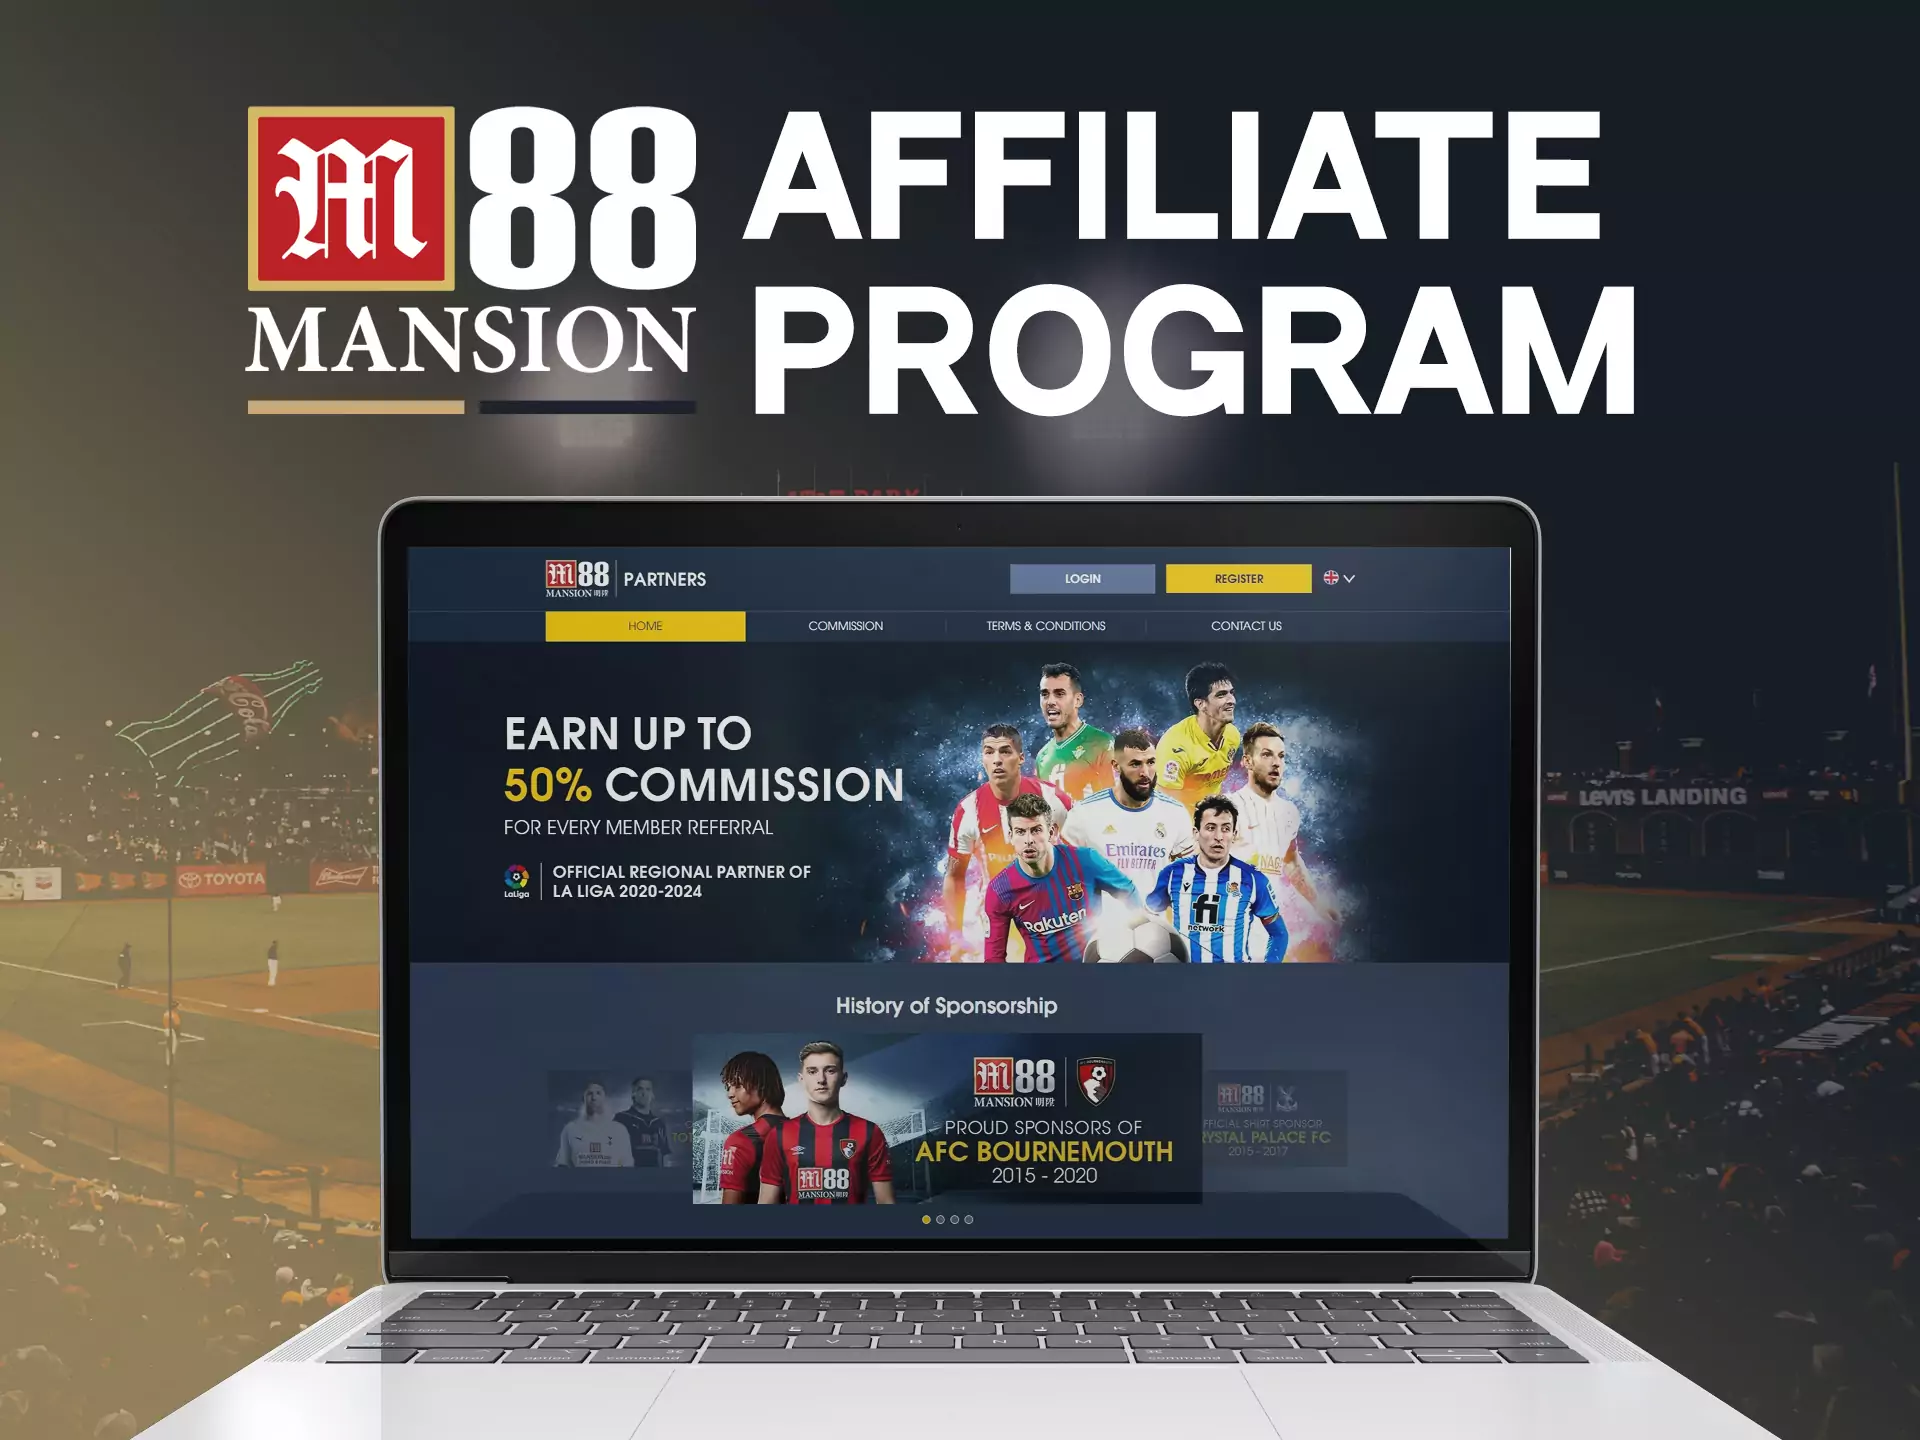 Registered users on M88 can join the affiliate program and increase their income.